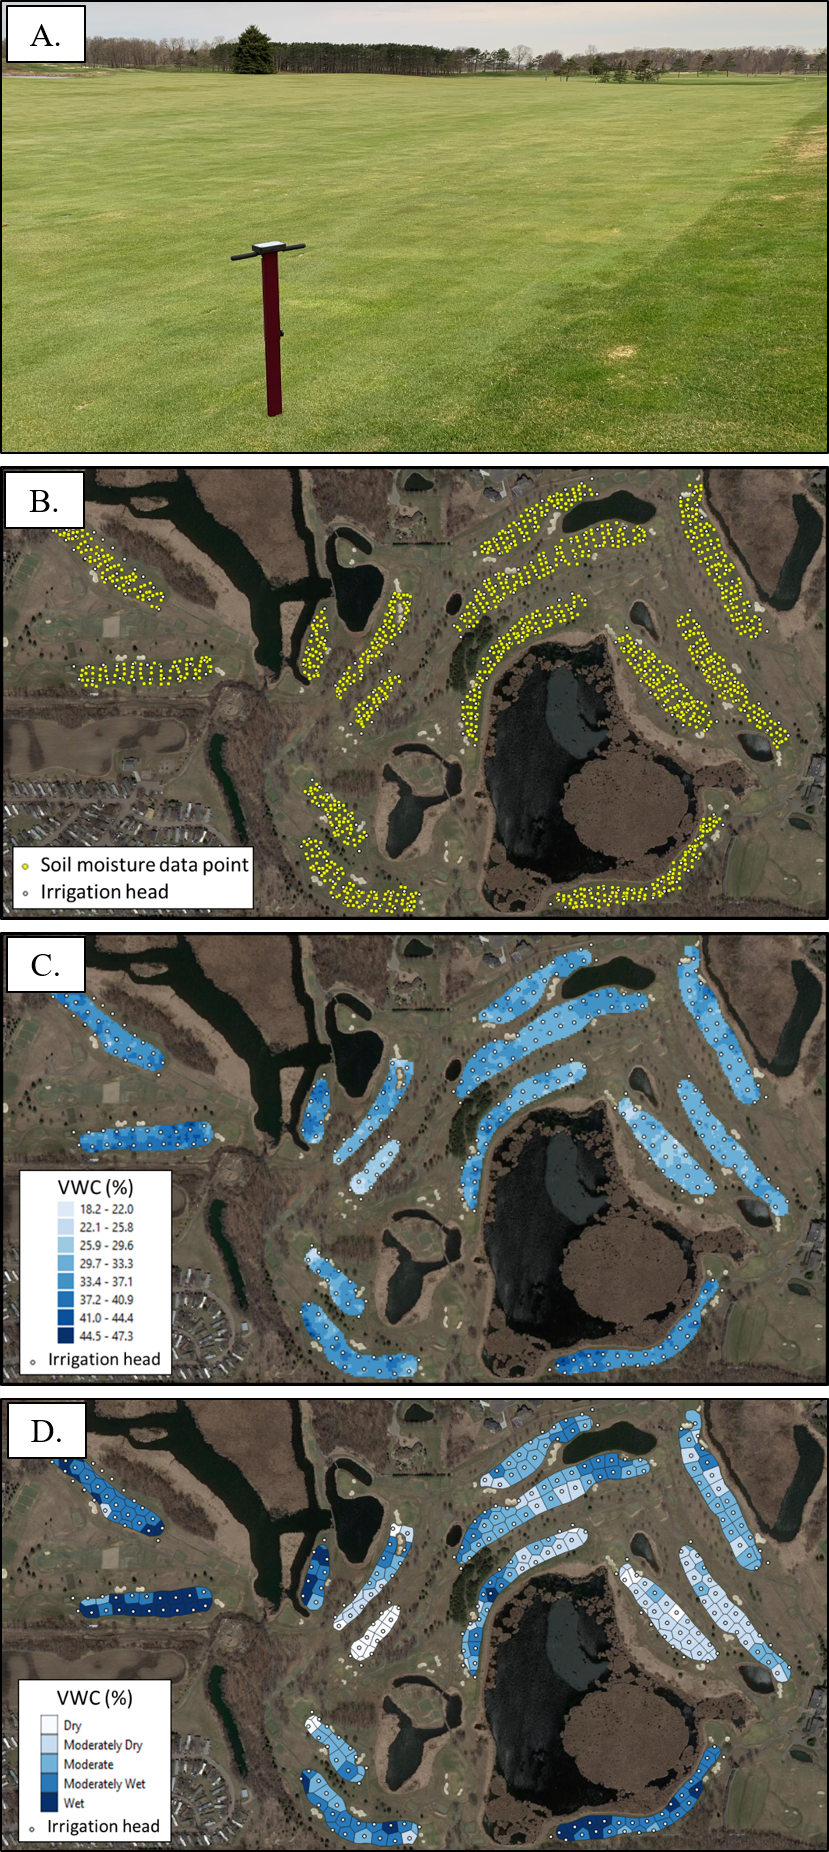 Four images. The top shows a fairway with a soil moisture meter, the remaining three are maps showing a golf course fairways.